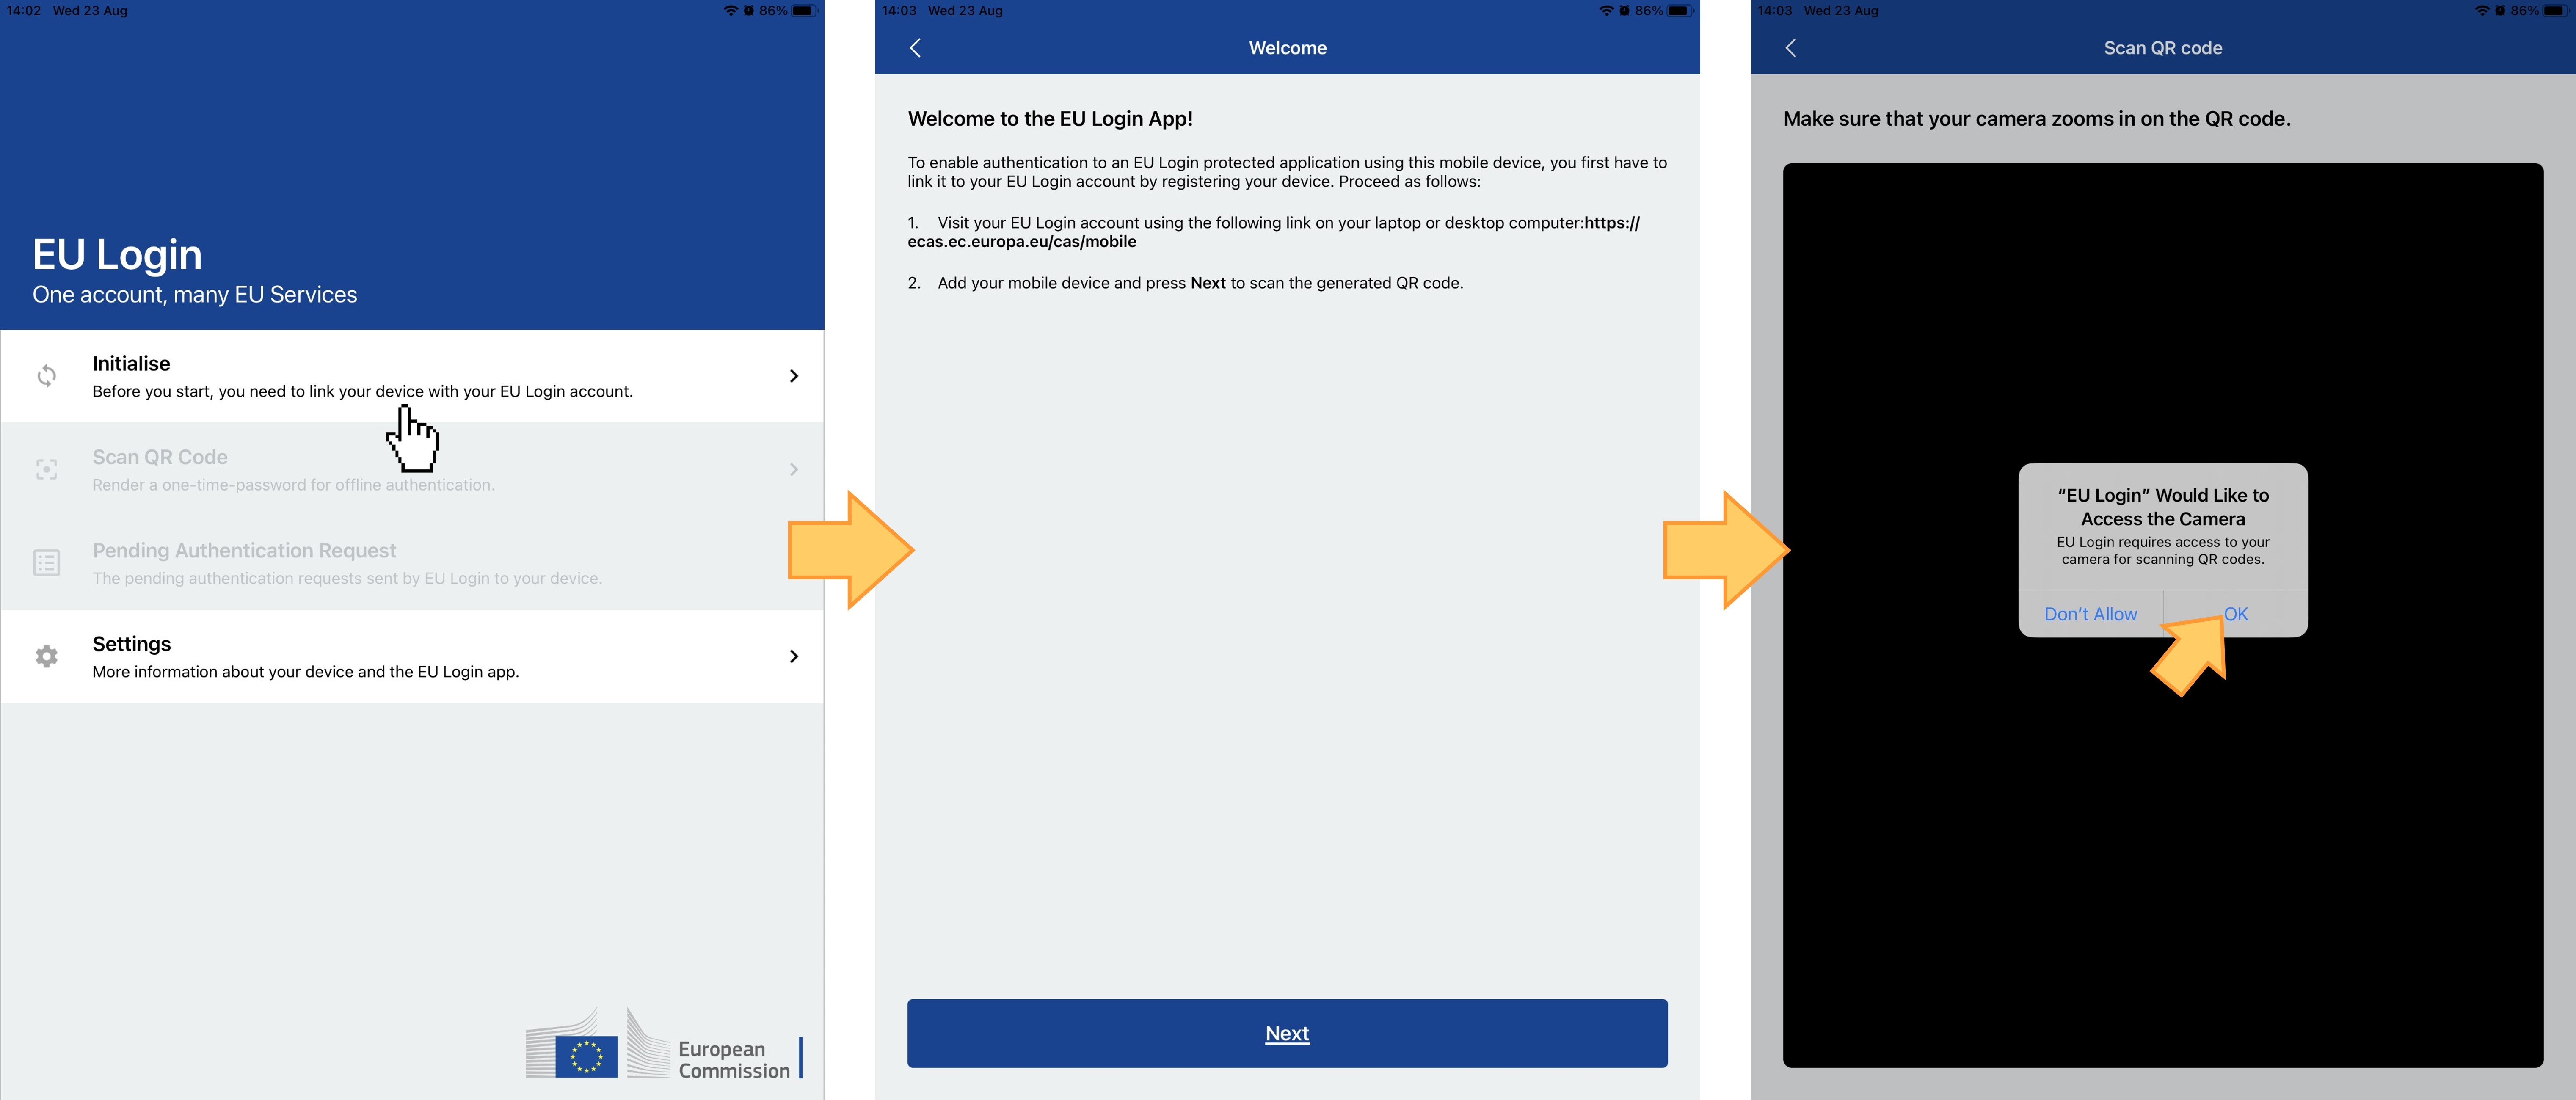 Open the EU Login Mobile App, select Initialise and follow the instructions on screen